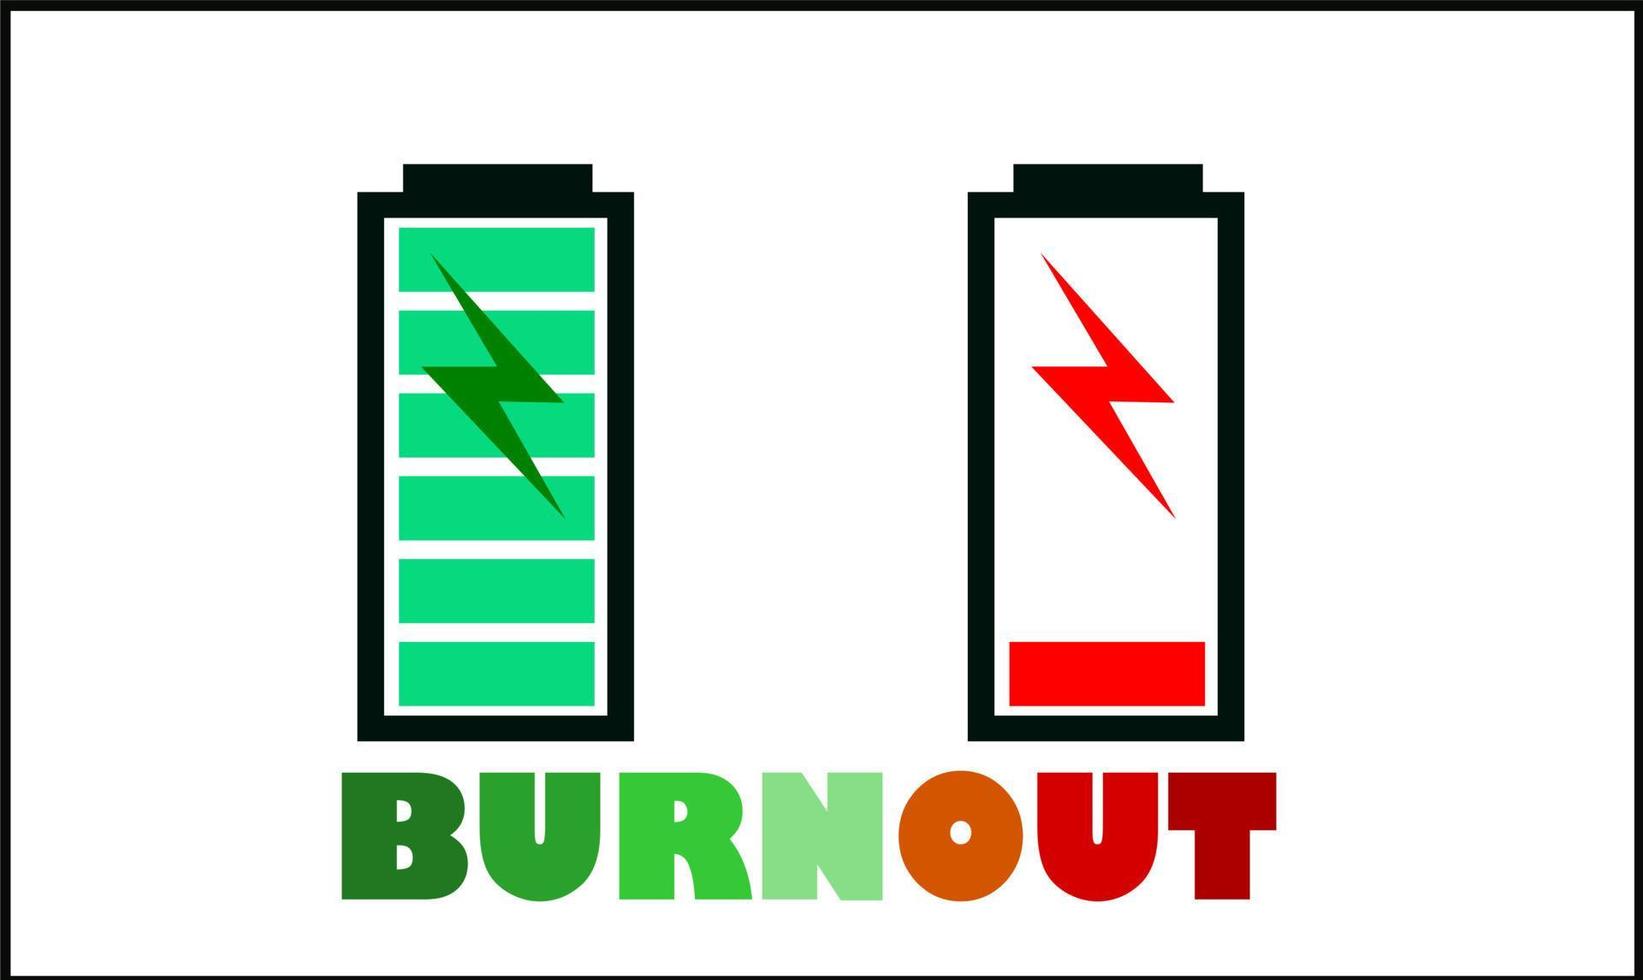 Vector design of burnout or worn out or exhausted battery.